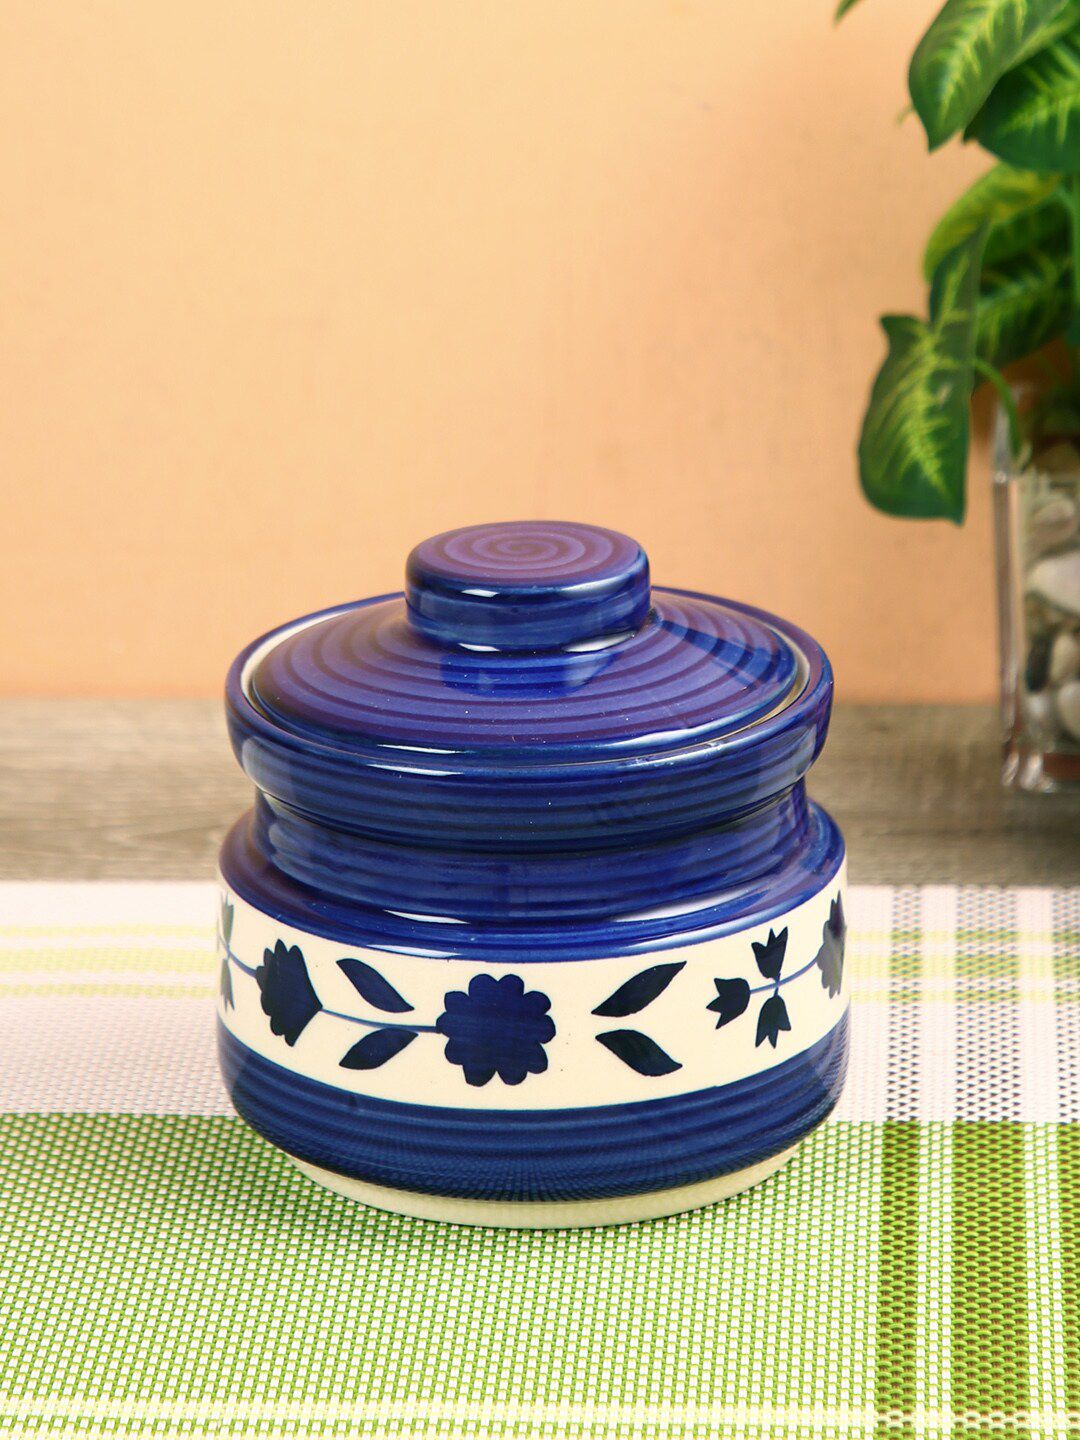 Aapno Rajasthan Blue & White Handcrafted Ceramic Blue Pottery Canister With Lid Price in India